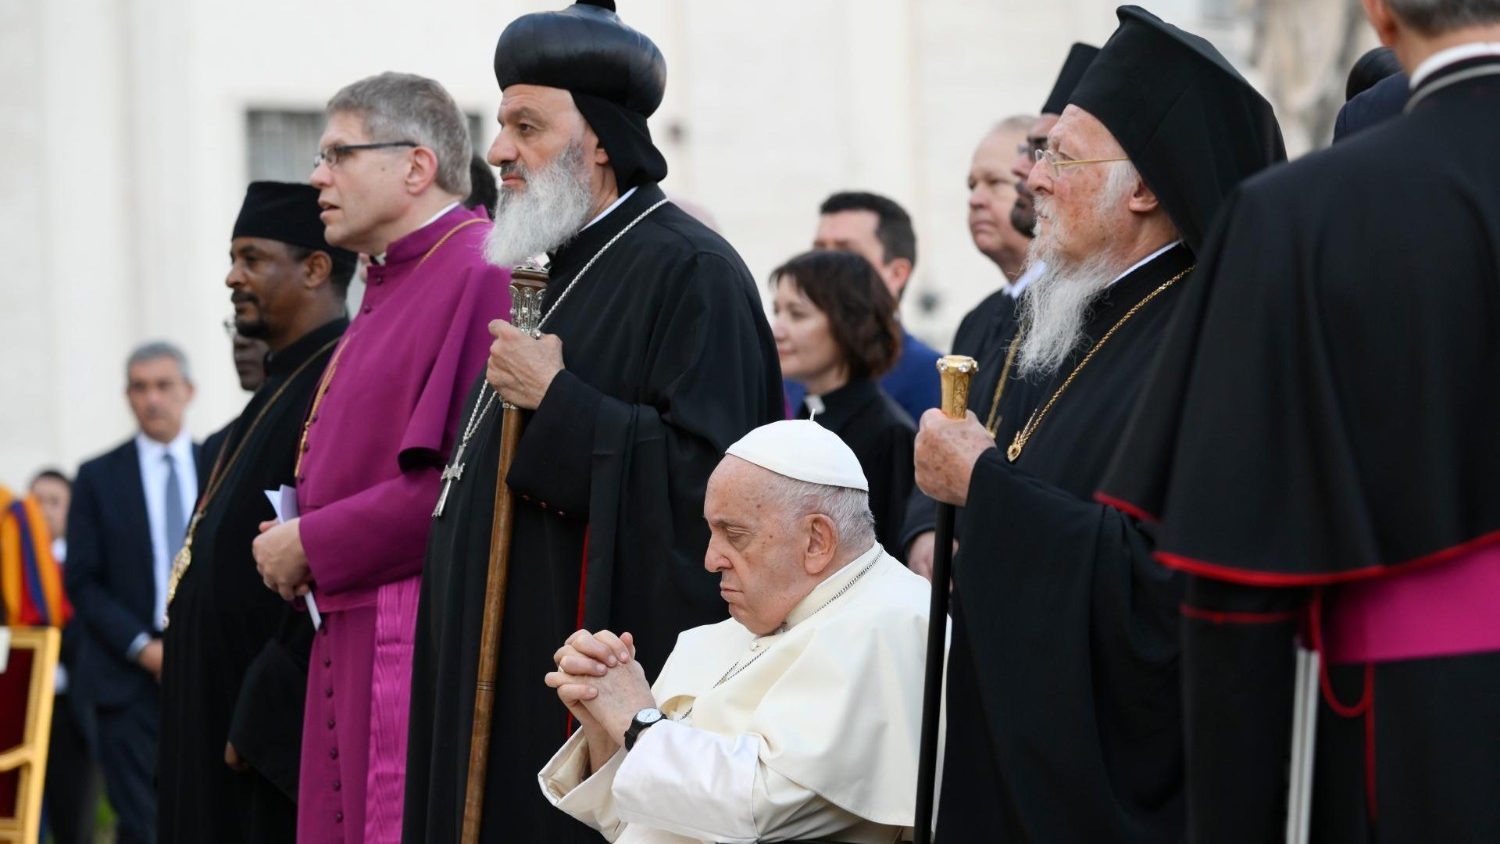 A Multitude in Prayer: Opening of the Synod Unites God’s People in Listening to the Holy Spirit